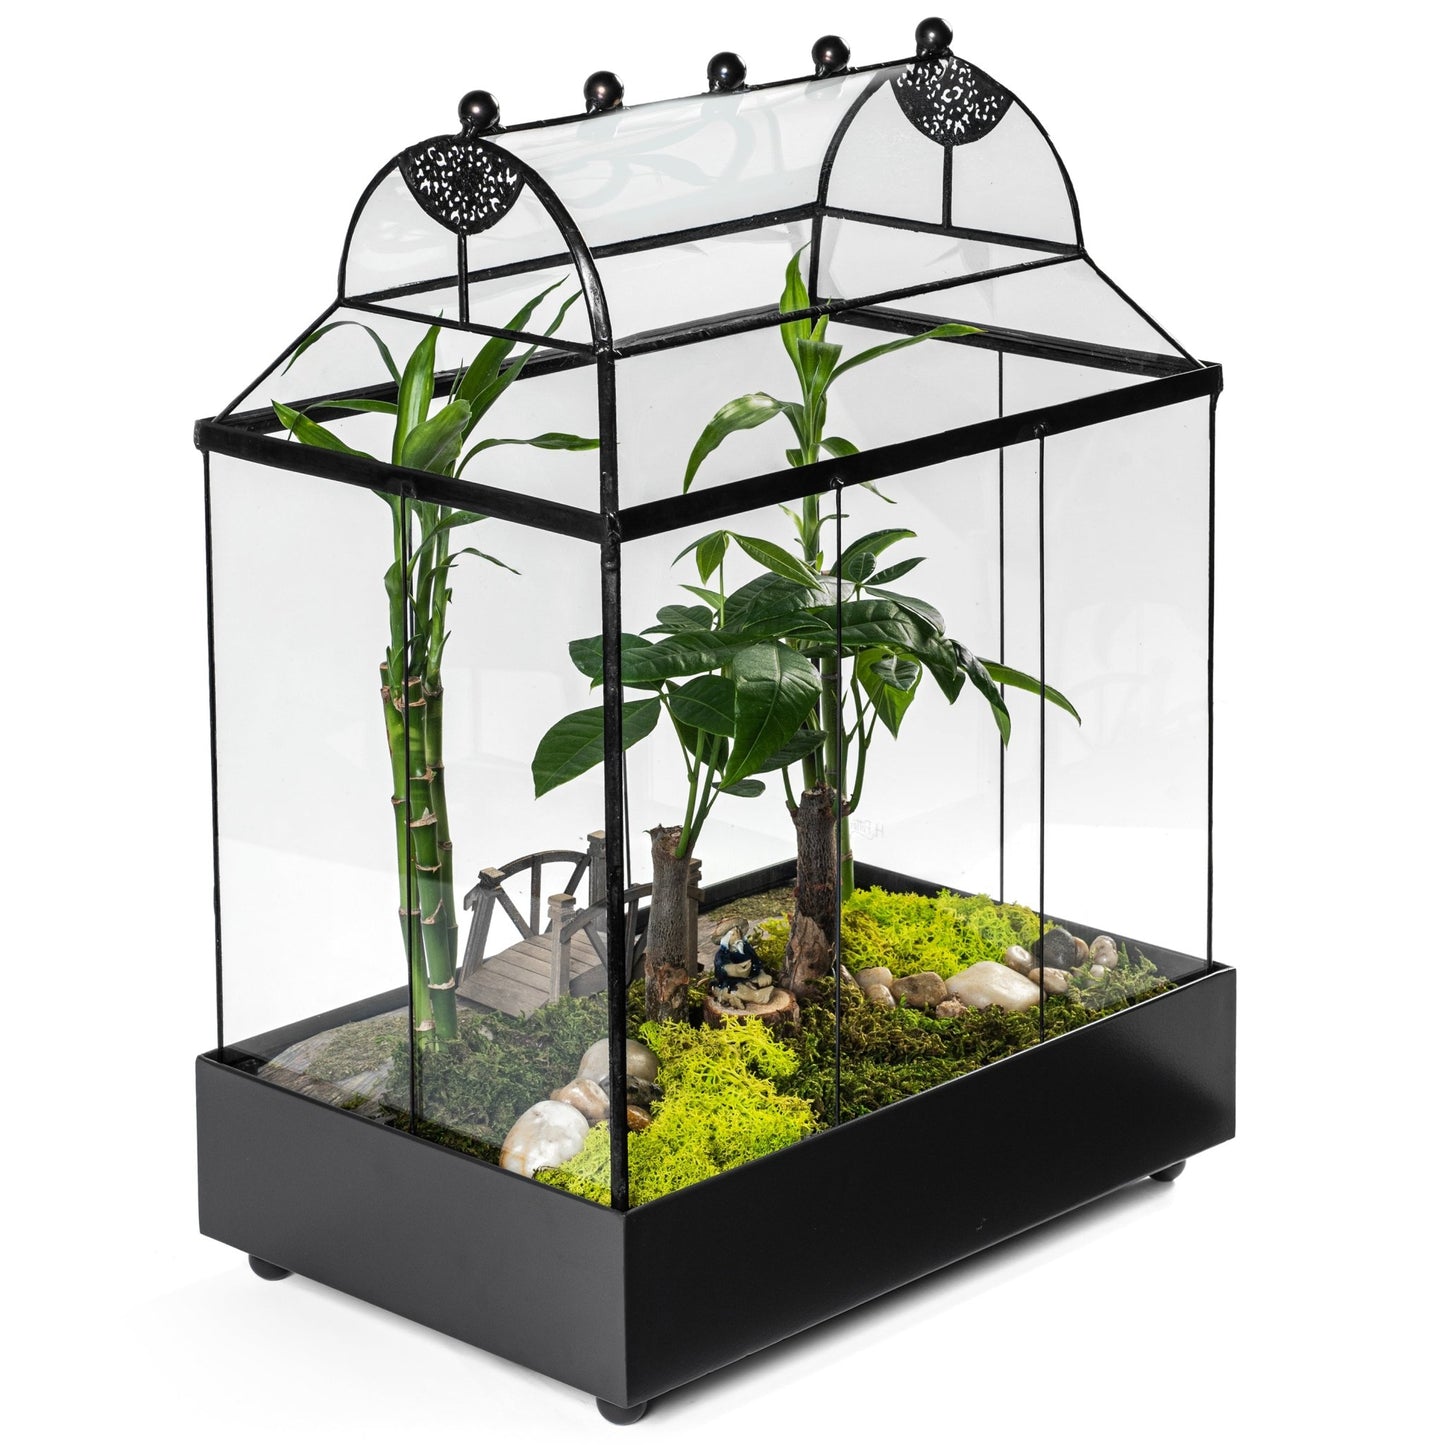 H Potter Wardian Case Terrarium For Sale with Curved Glass Roof Plant Planter Container Indoor Garden Mothers Day Gift